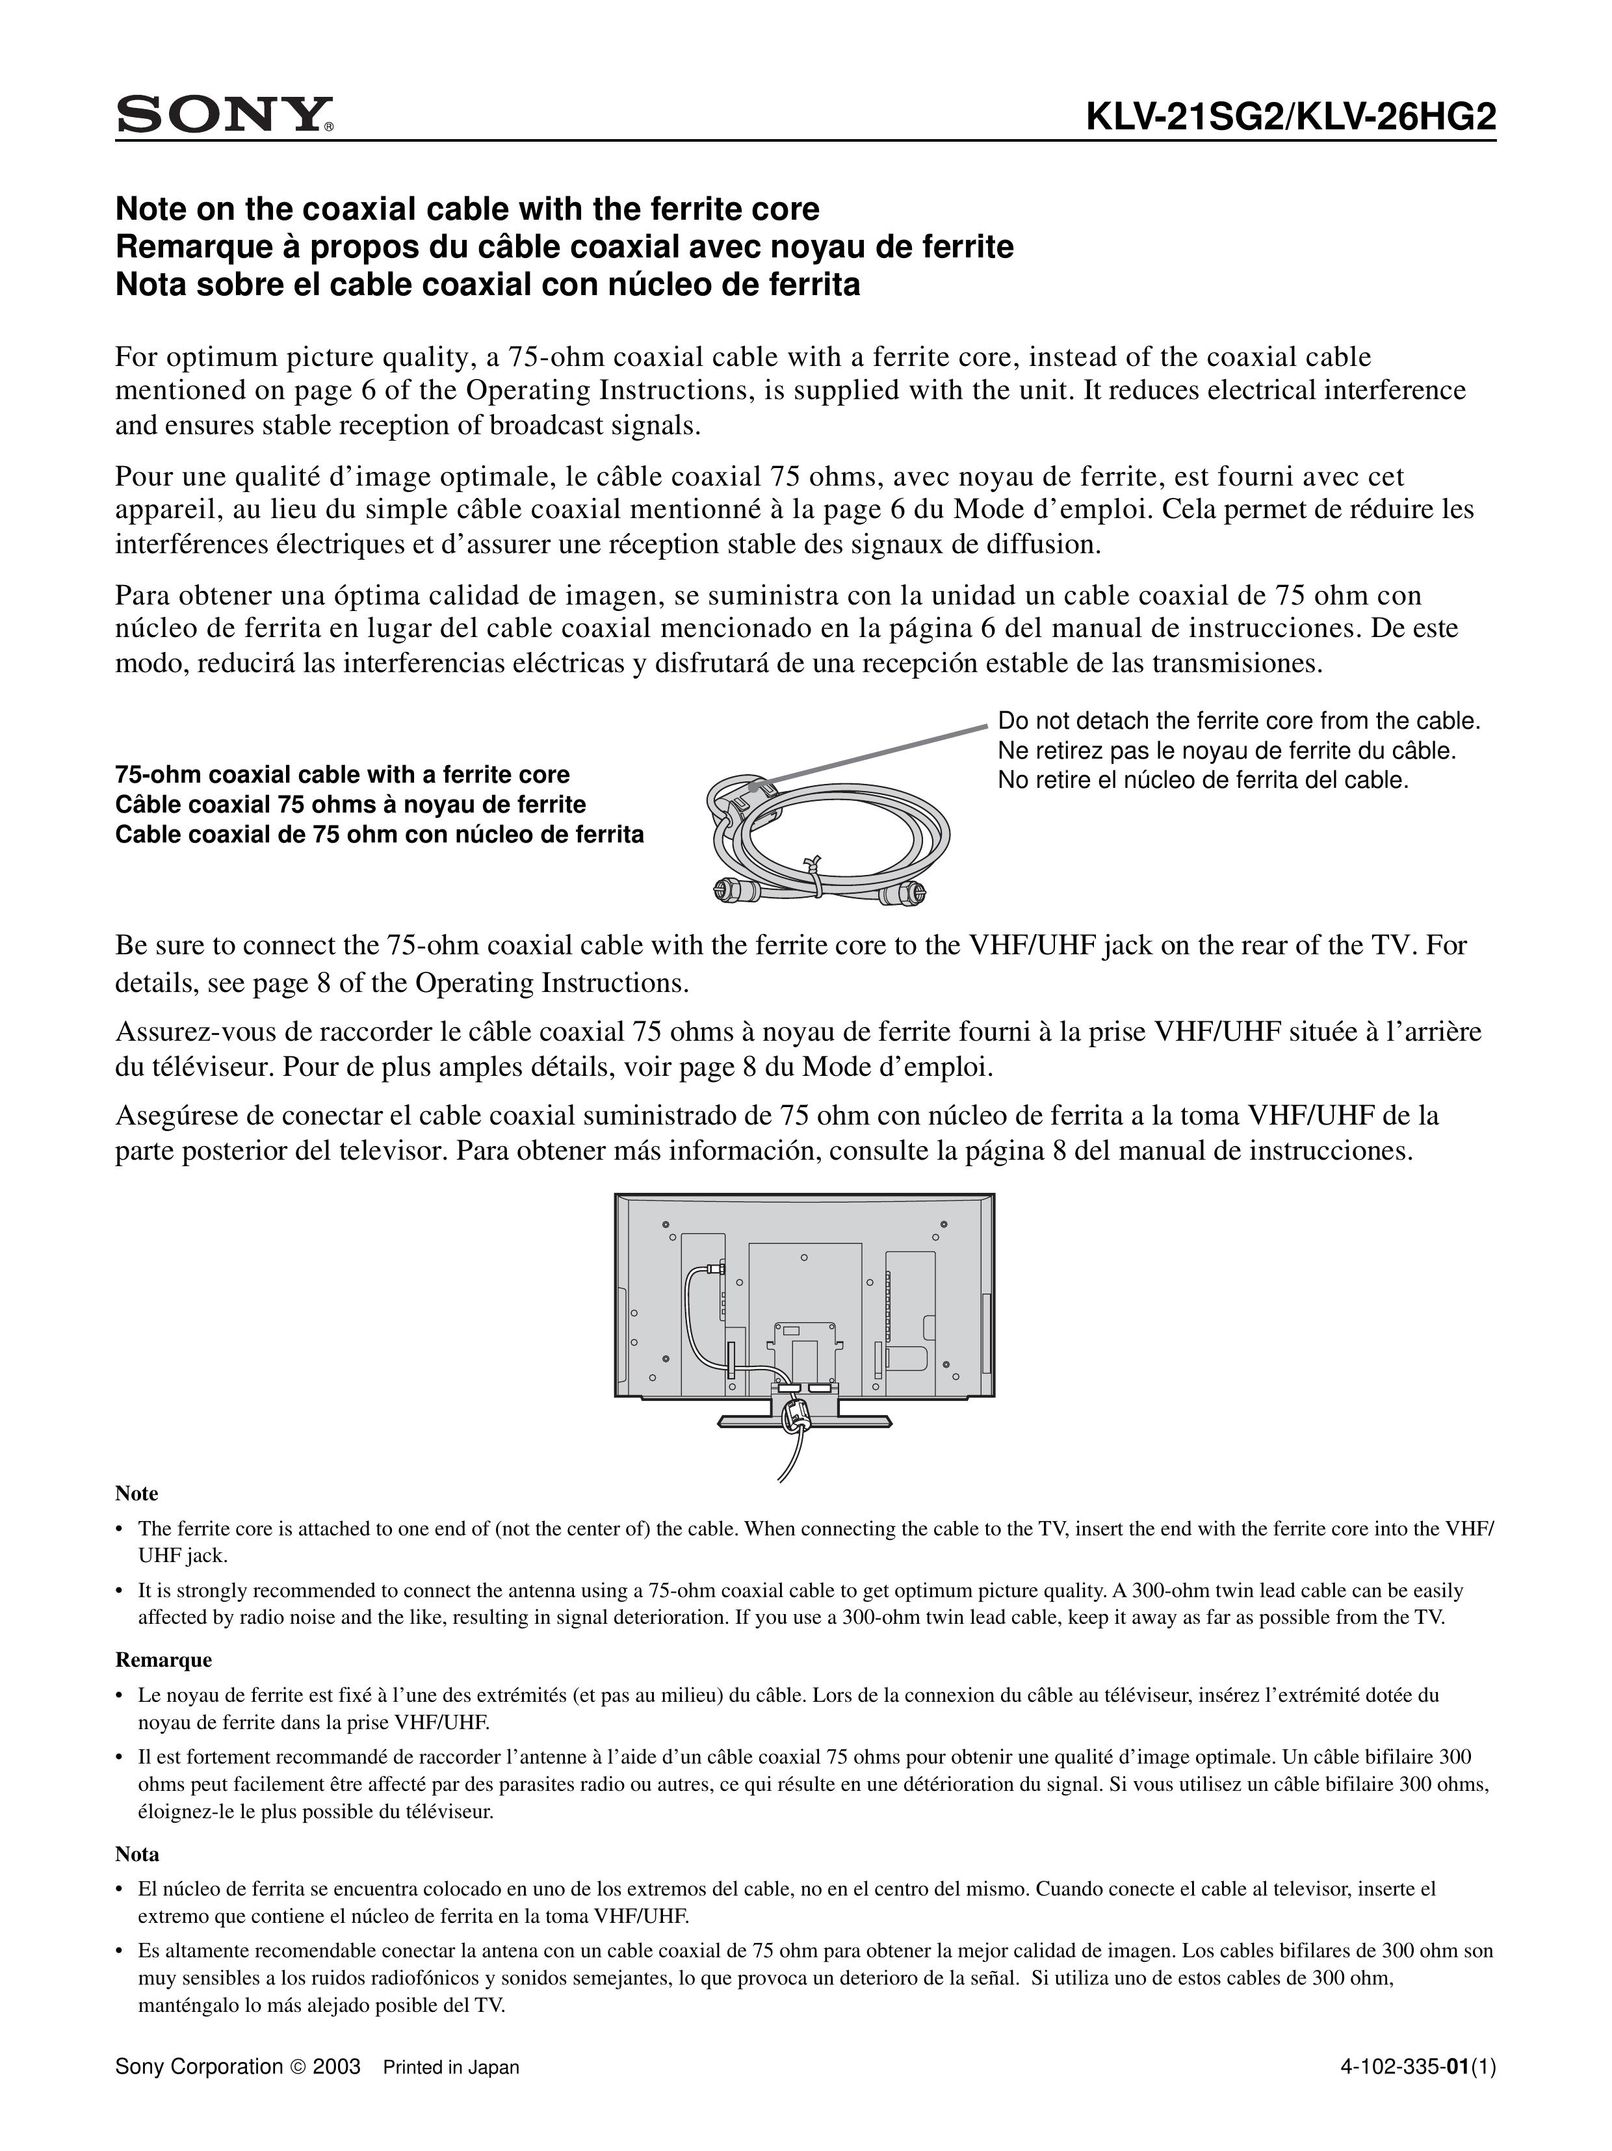 Sony KLV-21SG2 TV Cables User Manual